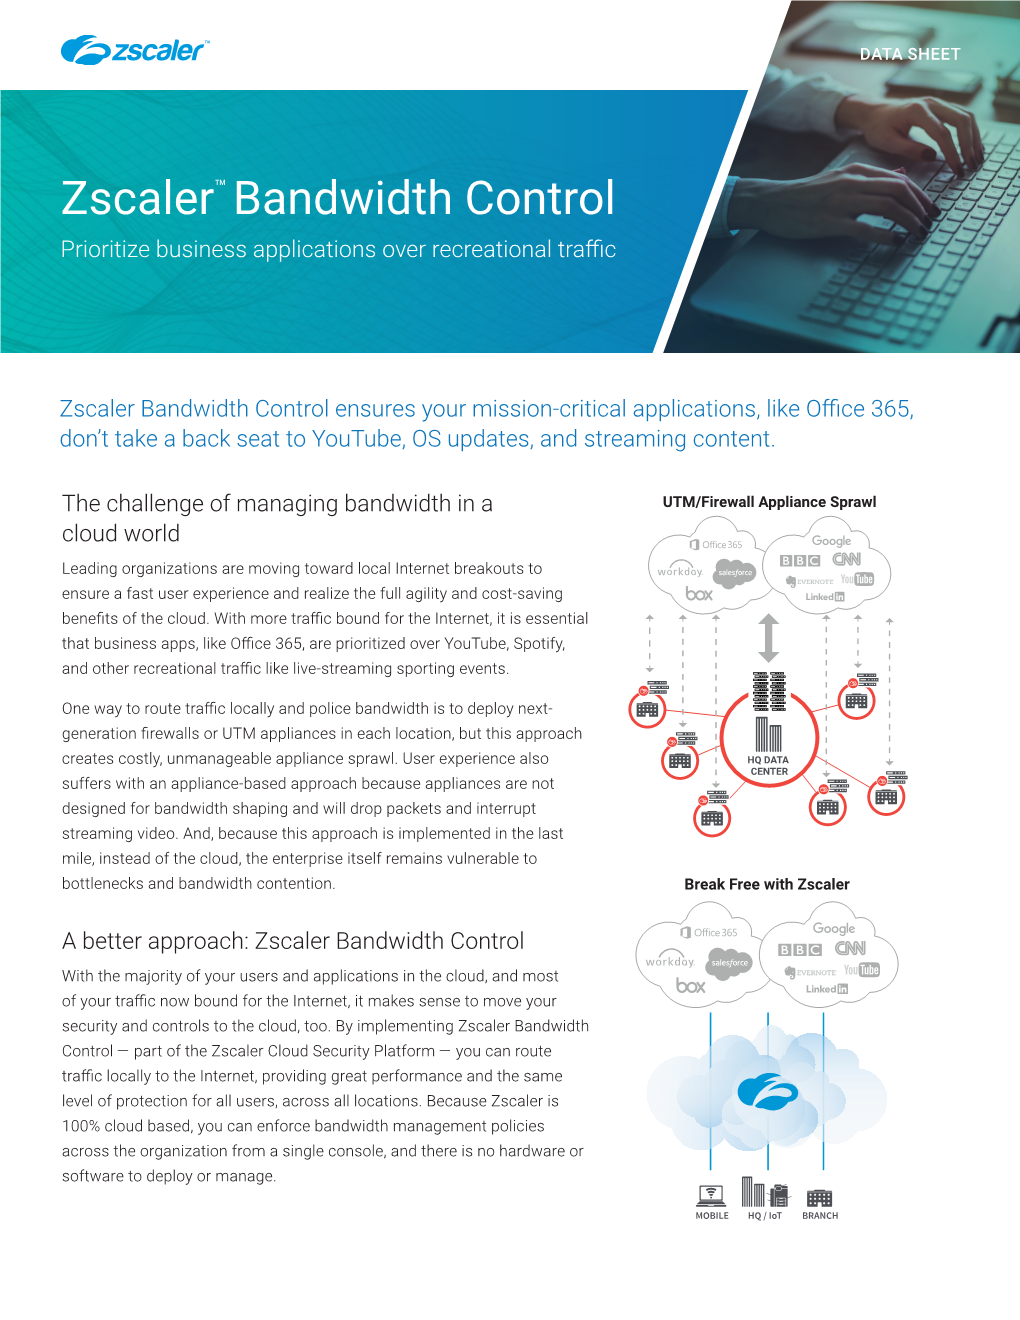 Zscaler Bandwidth Control Ensures Your Mission-Critical Applications, Like Office 365, Don’T Take a Back Seat to Youtube, OS Updates, and Streaming Content